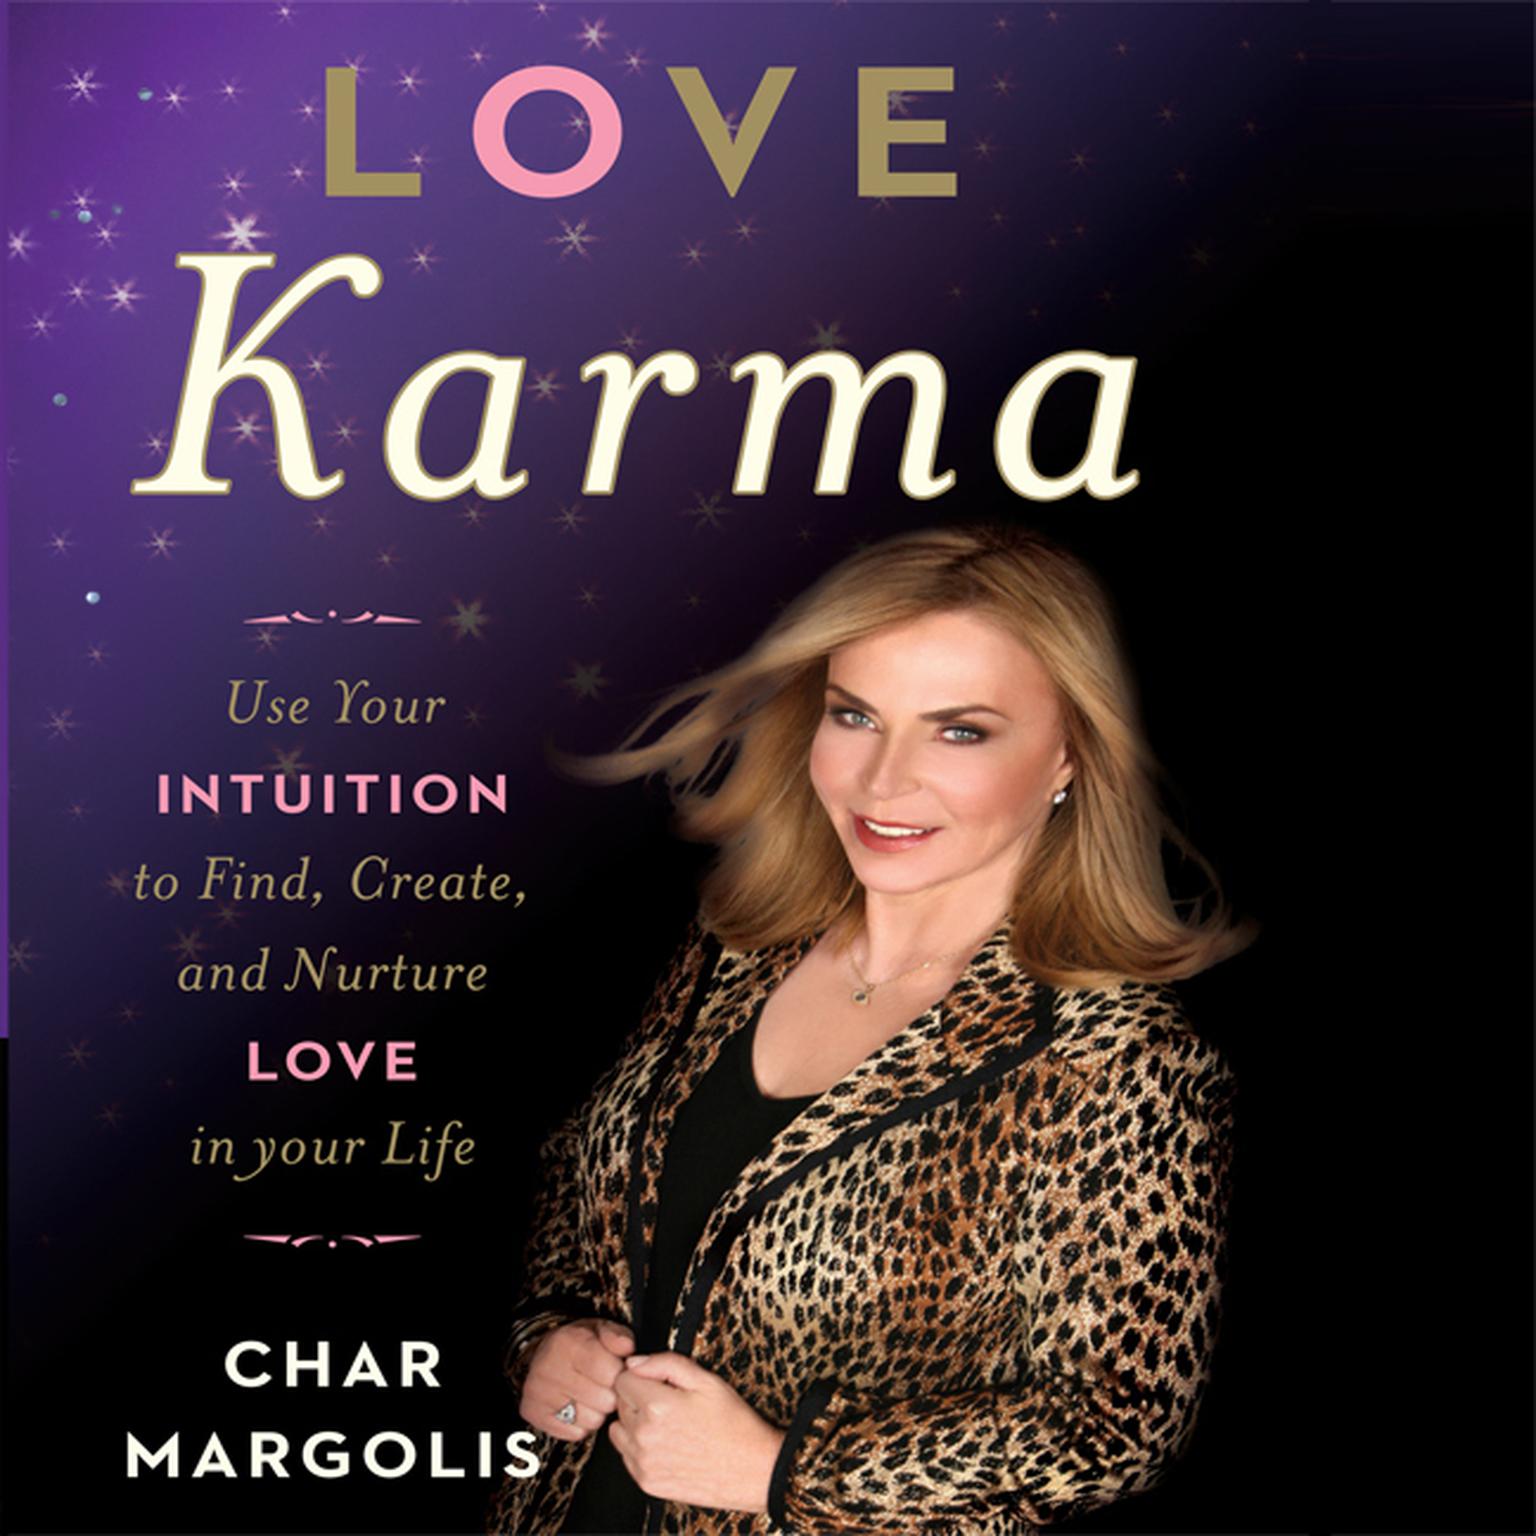 Love Karma: Use Your Intuition to Find, Create, and Nurture Love in Your Life Audiobook, by Char Margolis